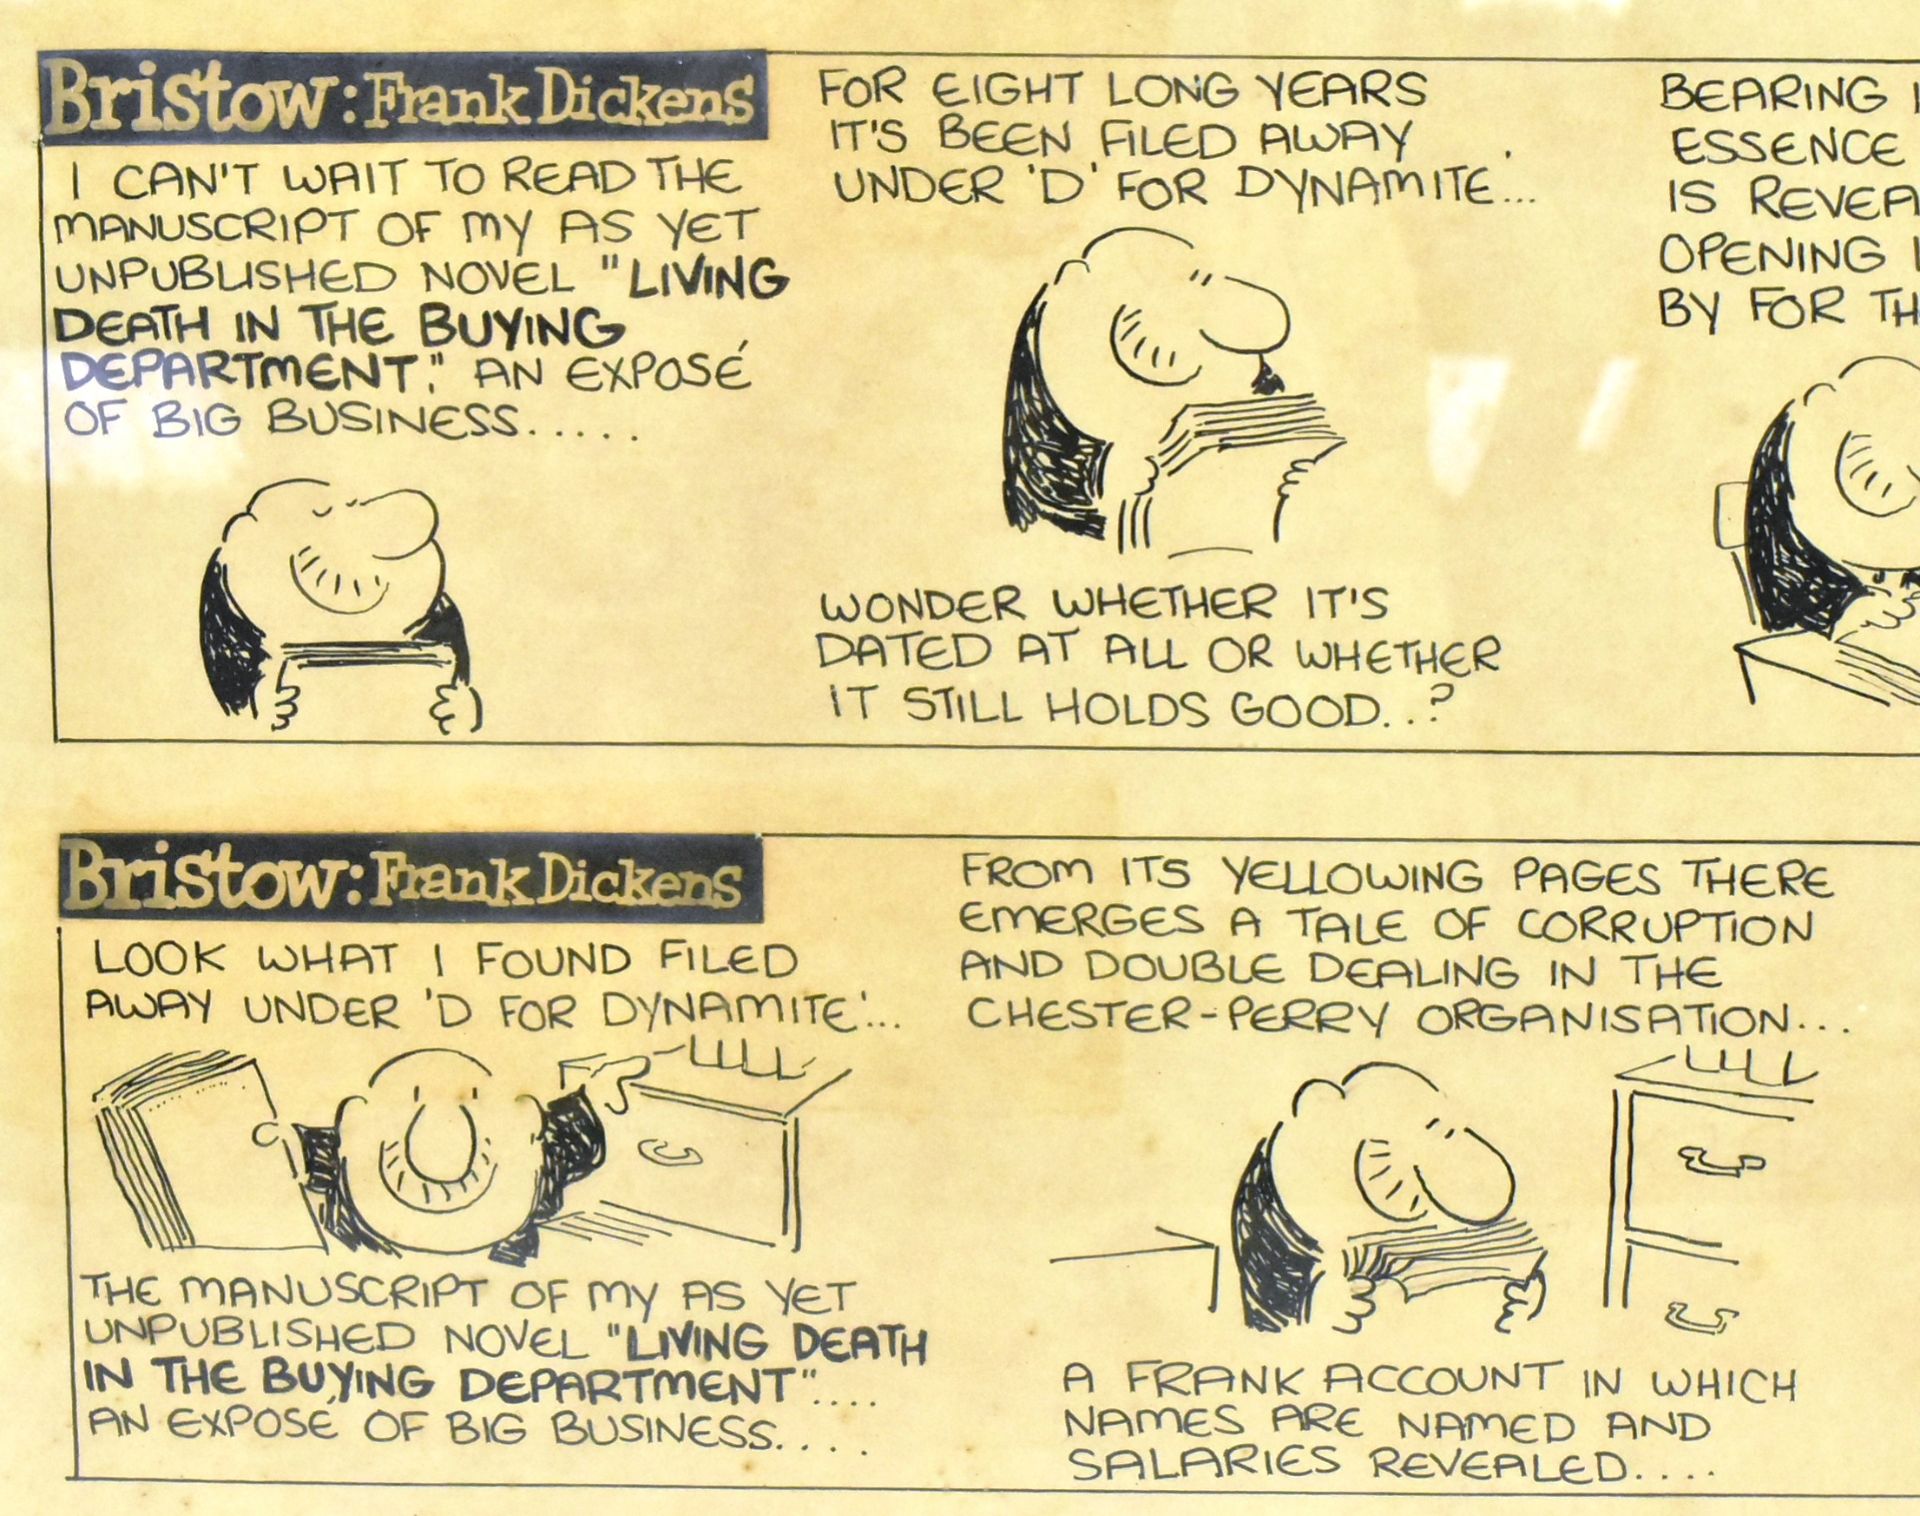 FRANK DICKENS BRISTOW INK ON PAPER CARTOON STRIP - Image 2 of 4